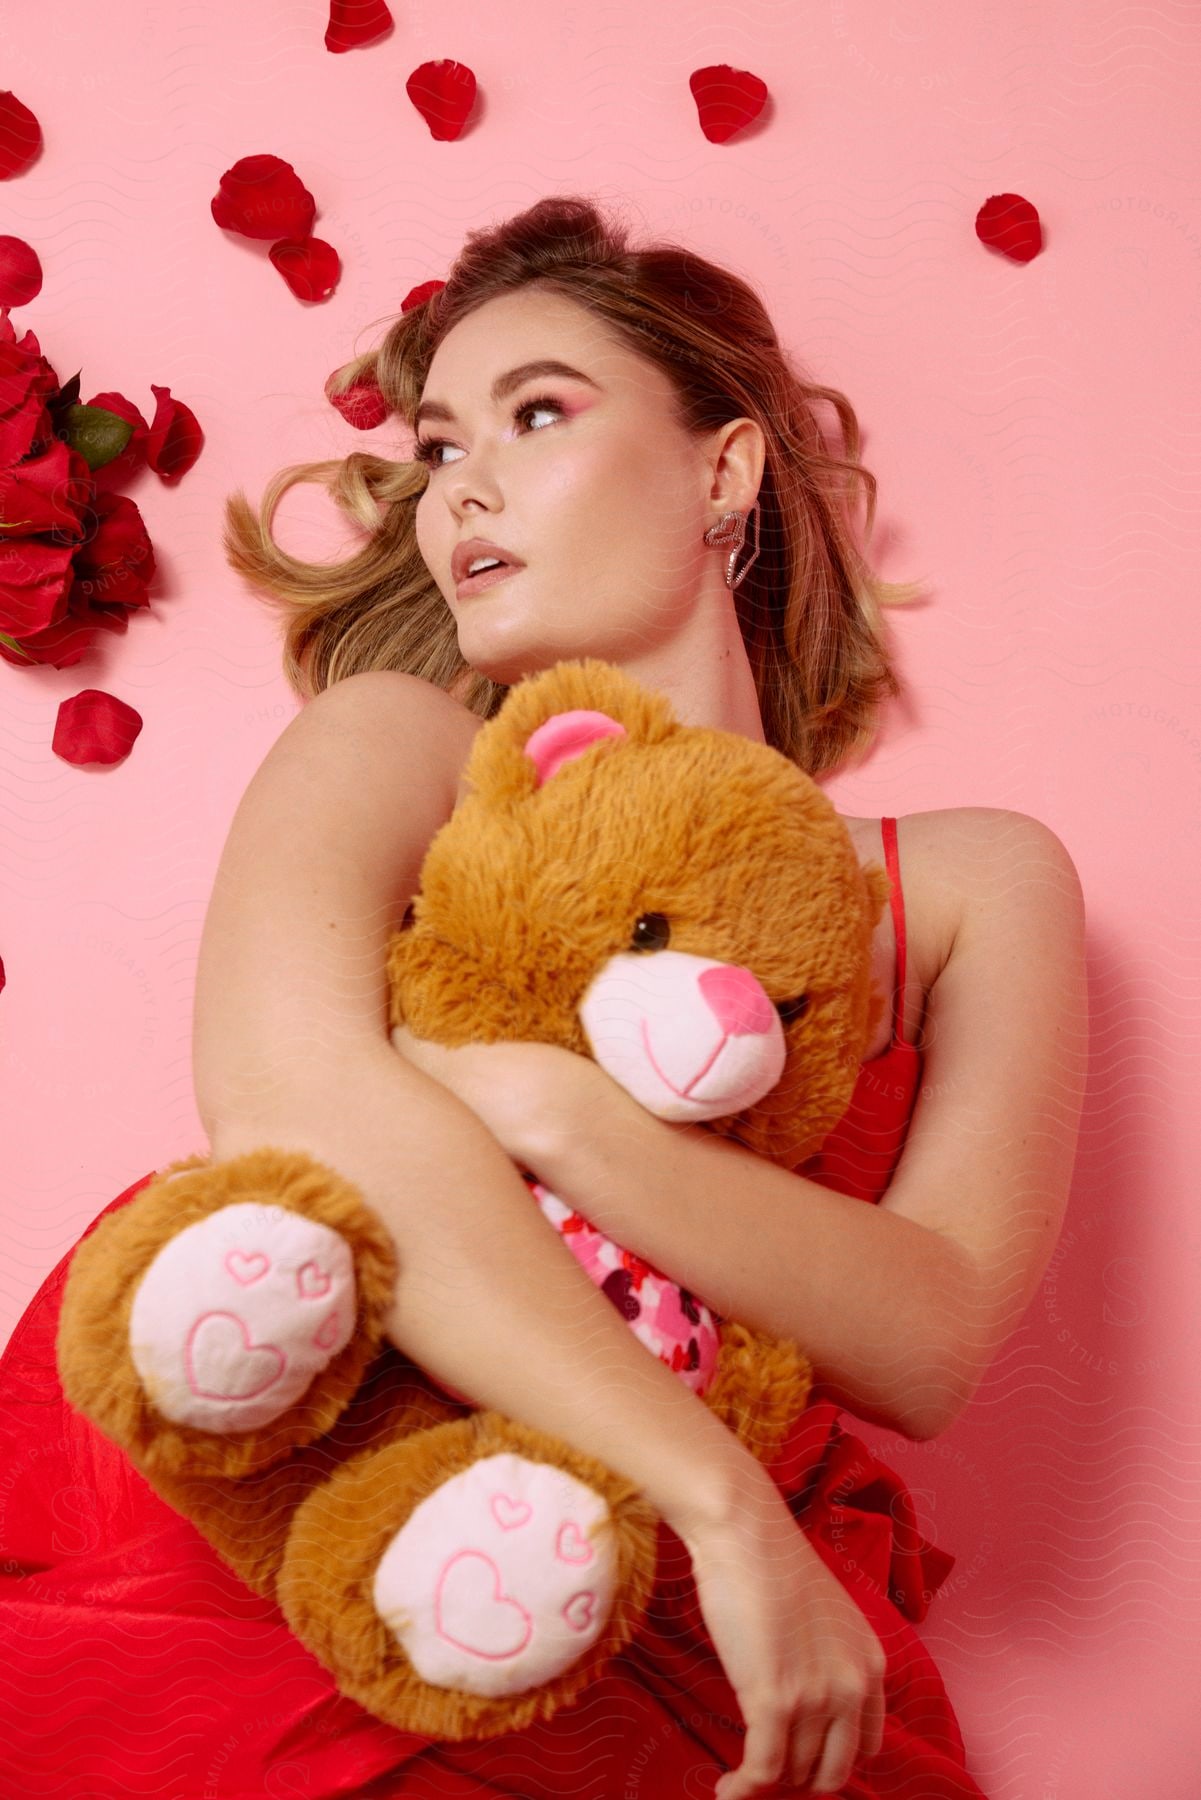 A beautiful woman hugging a teddy bear surrounded by rose petals